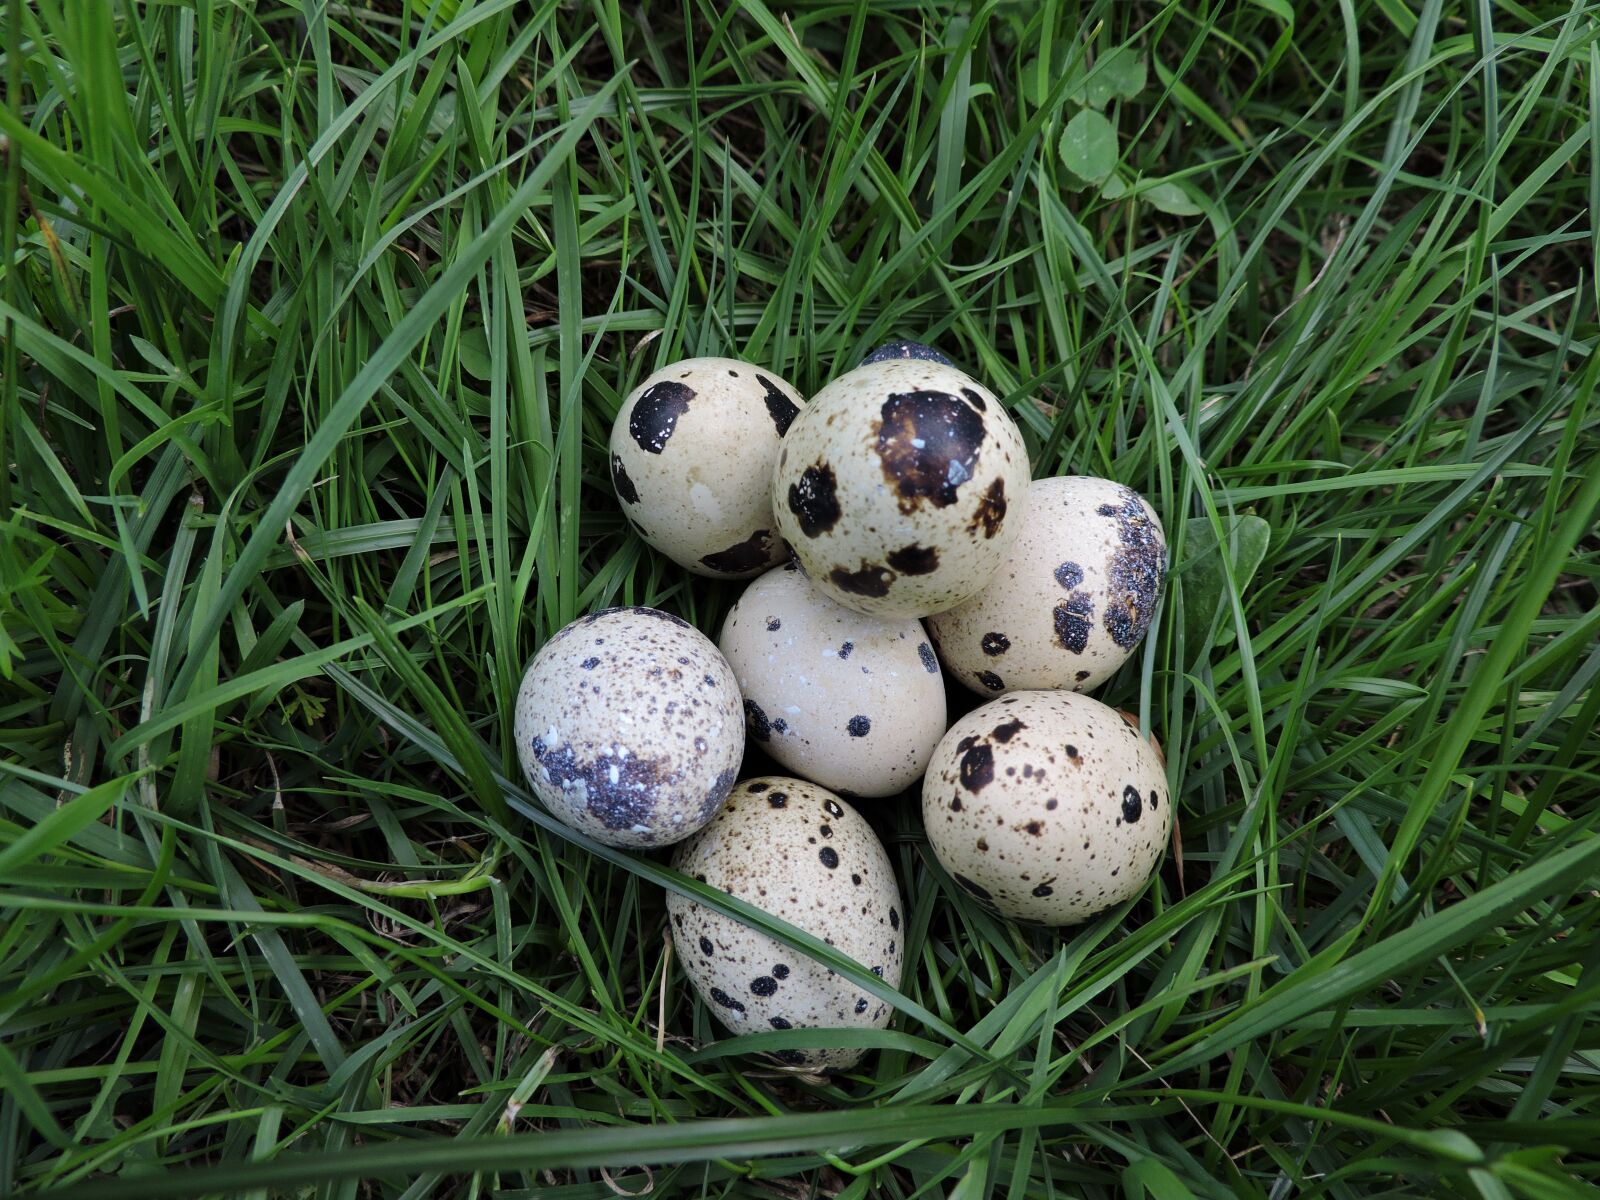 Nikon Coolpix P530 sample photo. Quail eggs, meadow, spotted photography